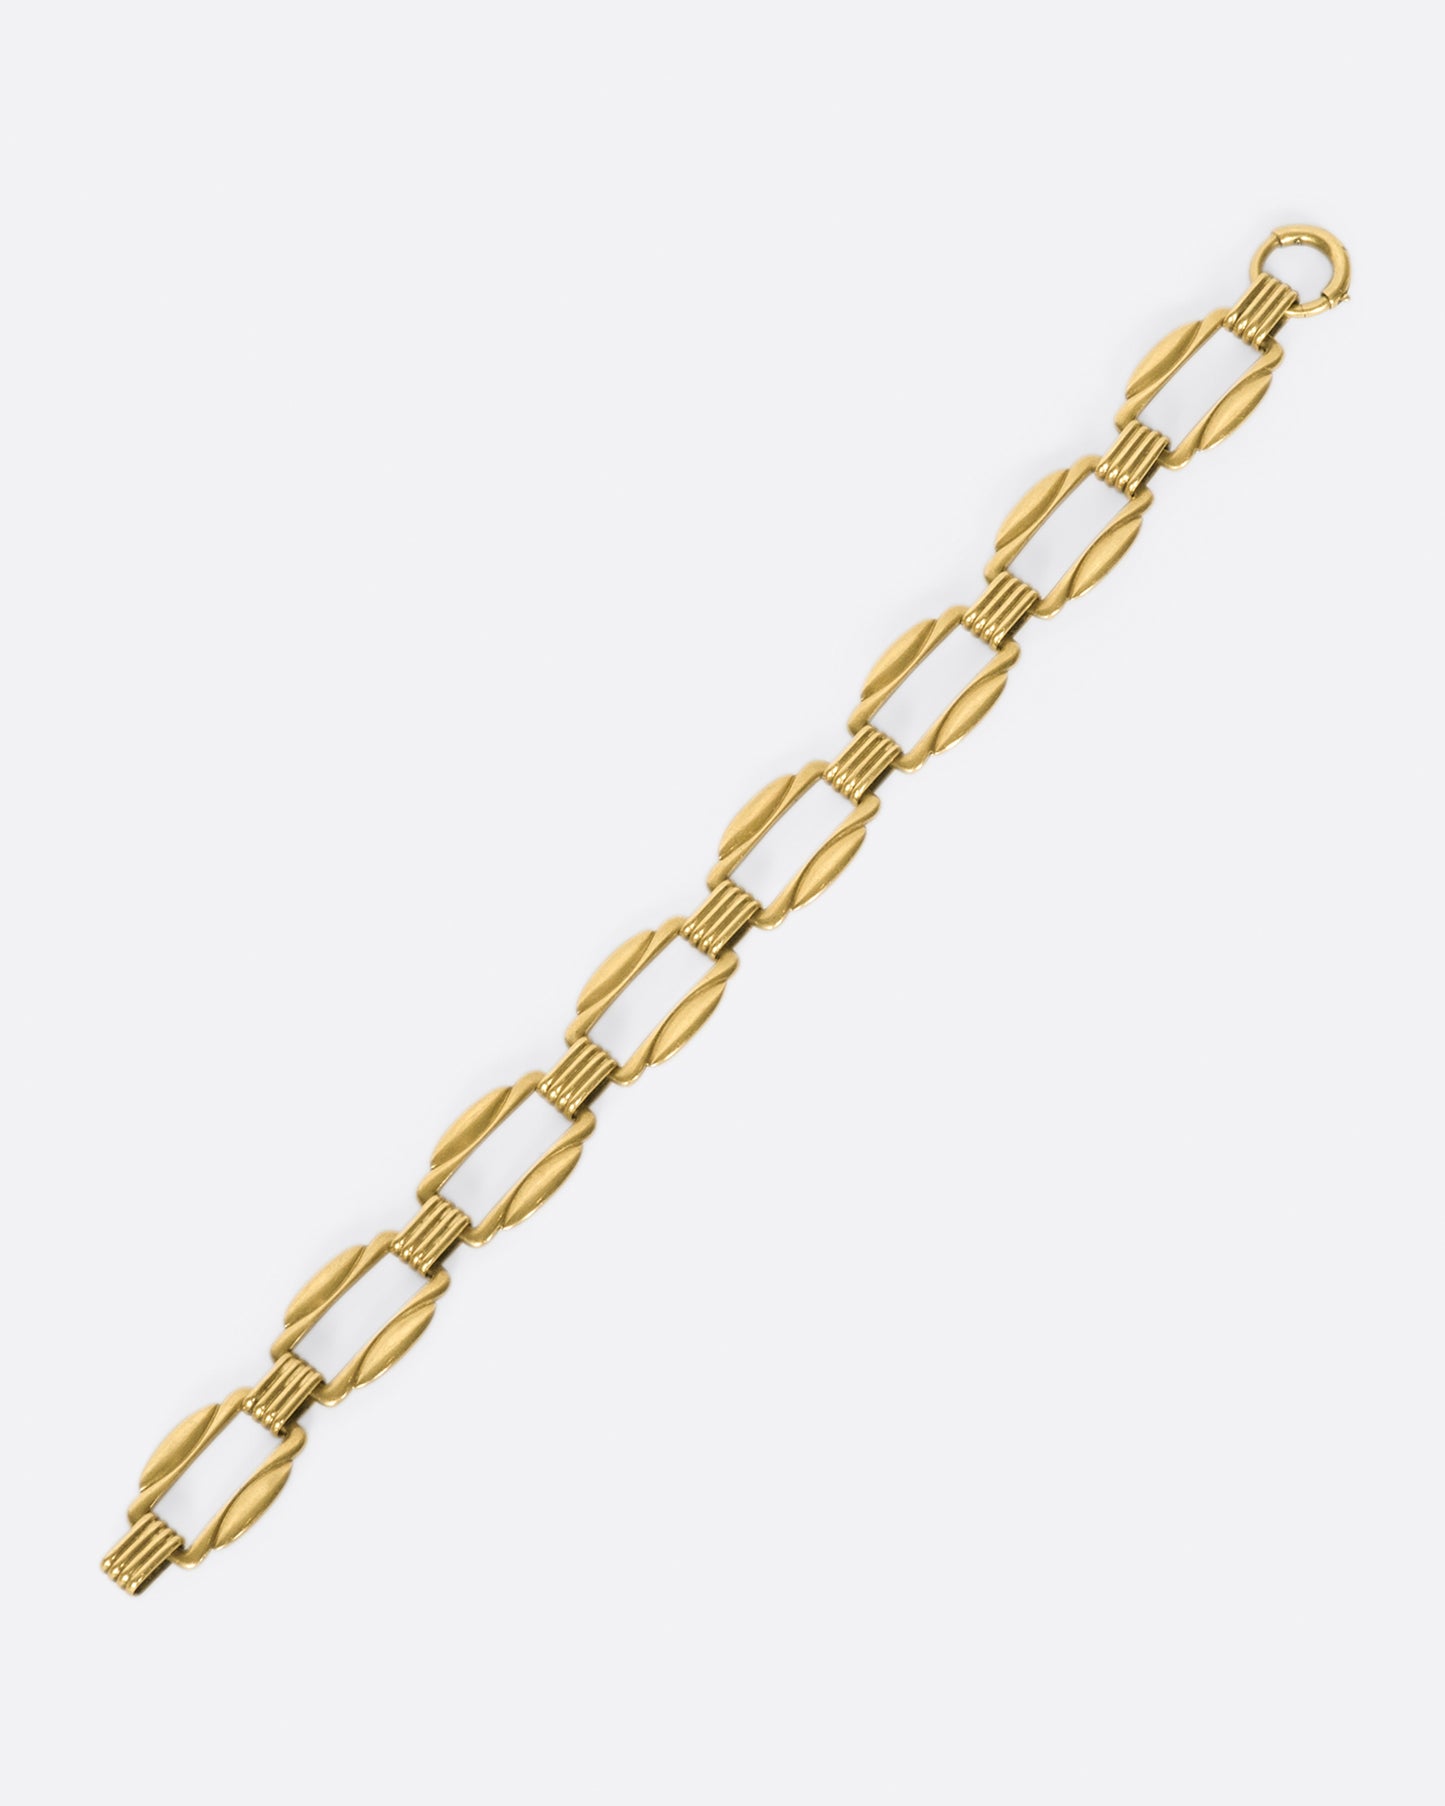 The clasp on this bracelet is hidden amongst its architectural links.